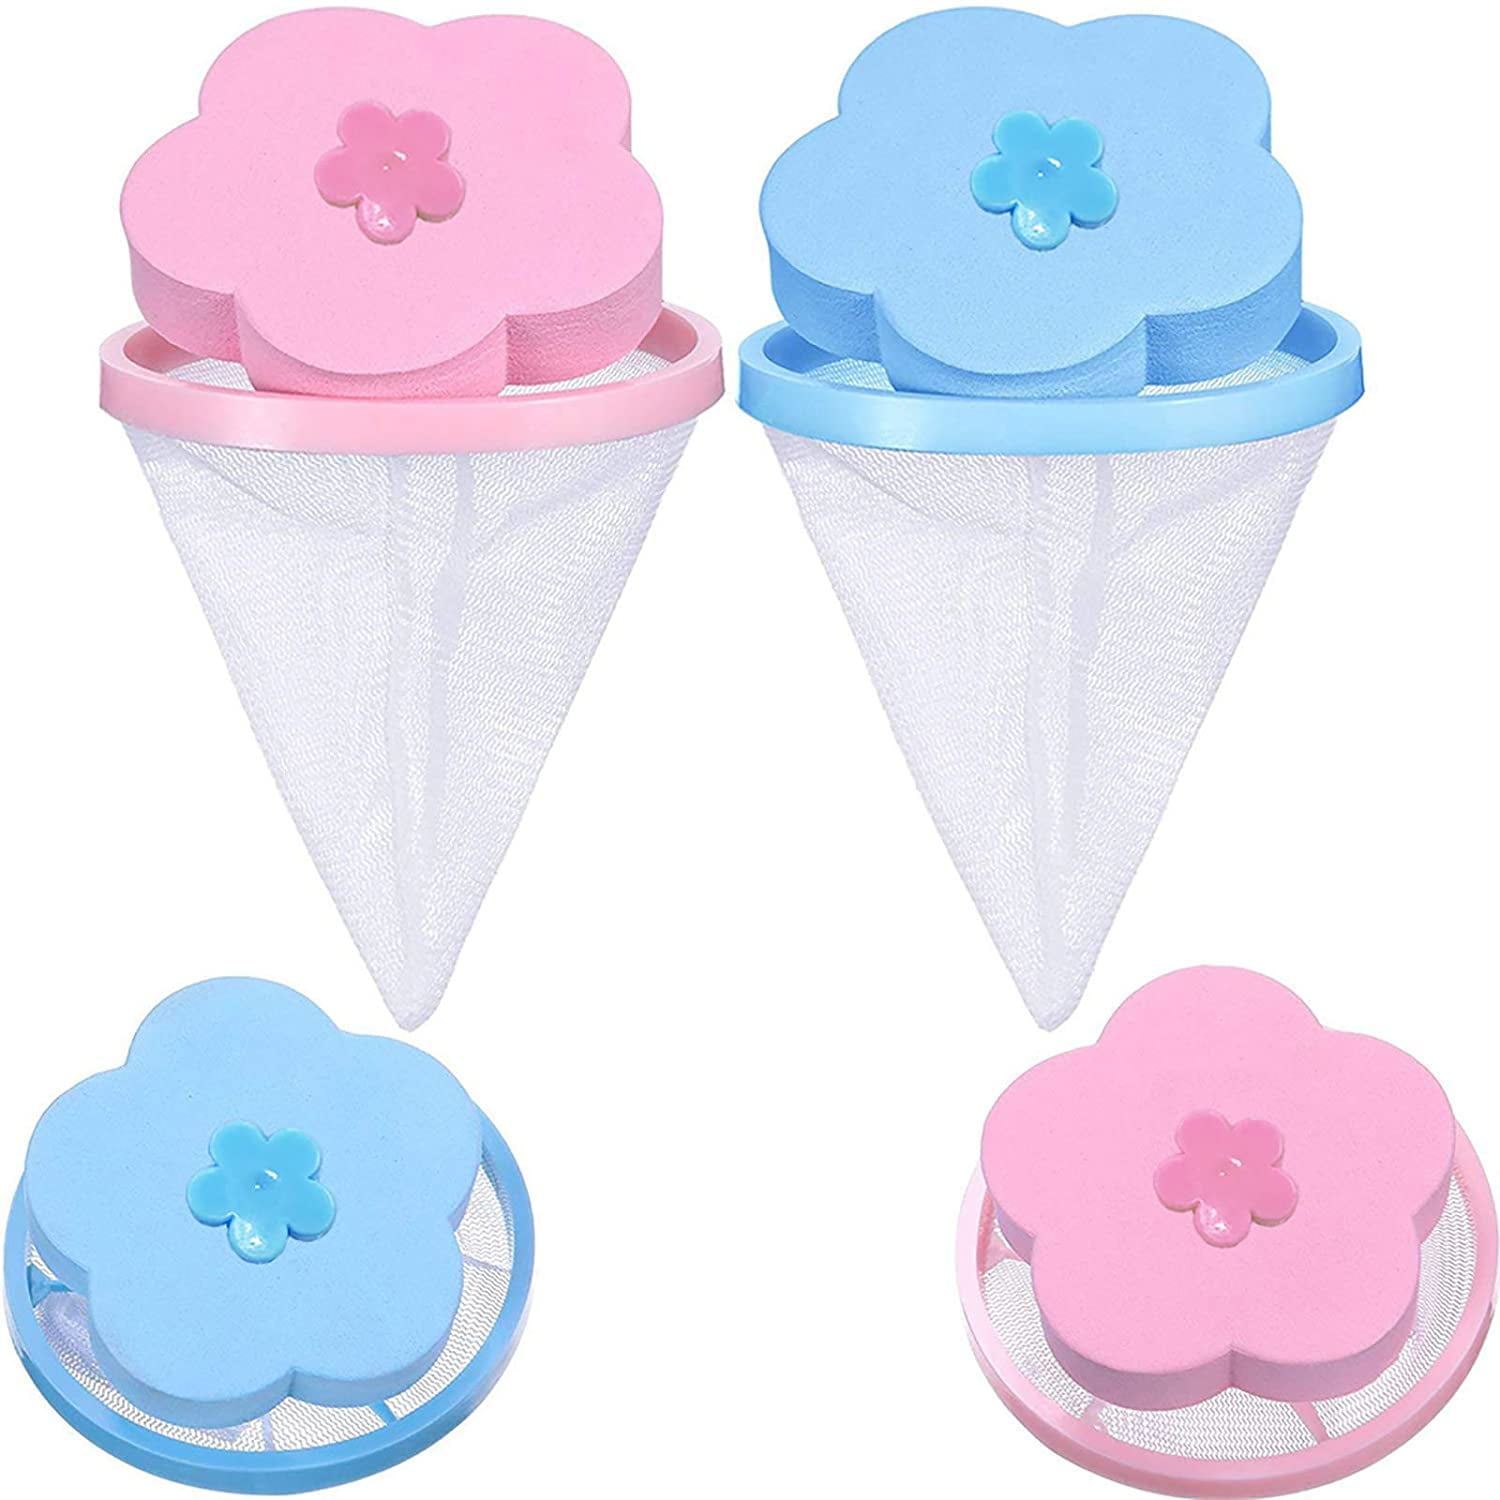 Filter Bags Net Washing Machine Floating Laundry Lint Hair Catcher Plum-shaped 